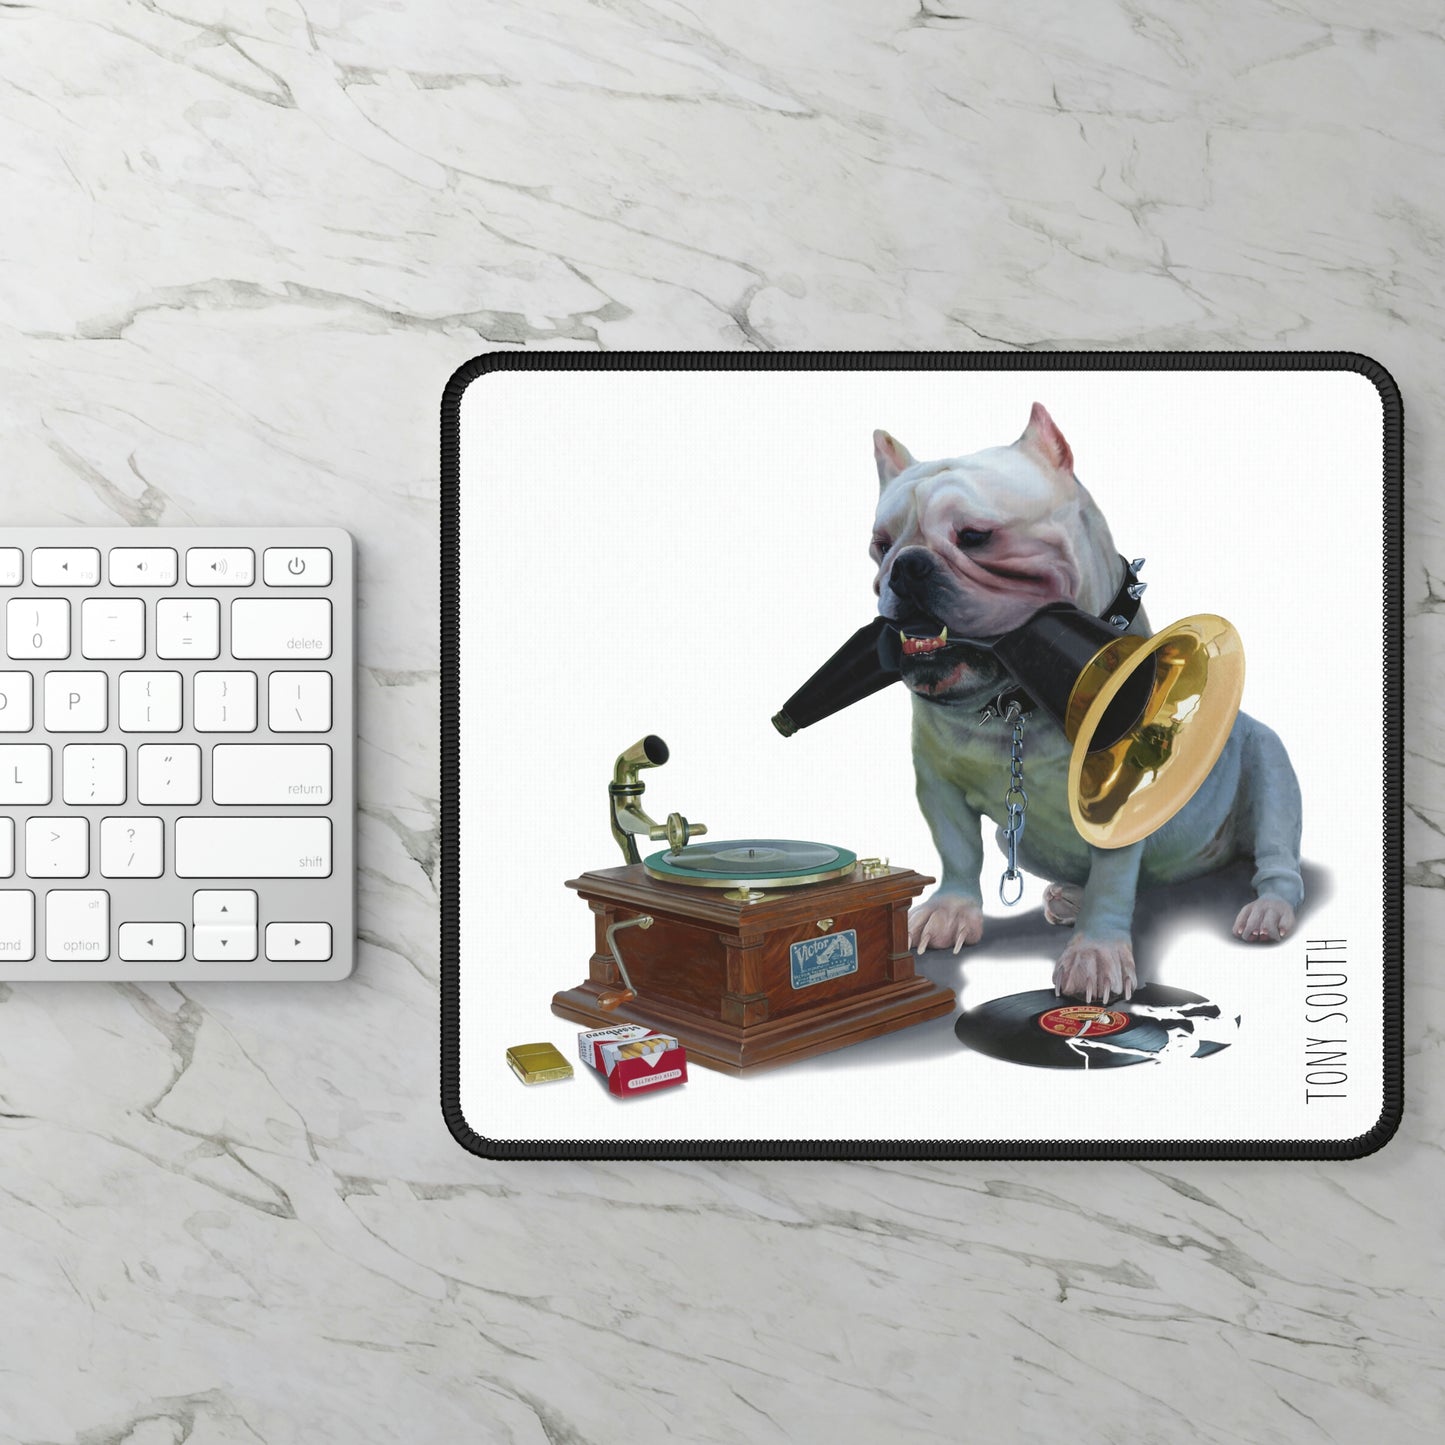 Tony South: "His Masters Voice" - Gaming Mouse Pad